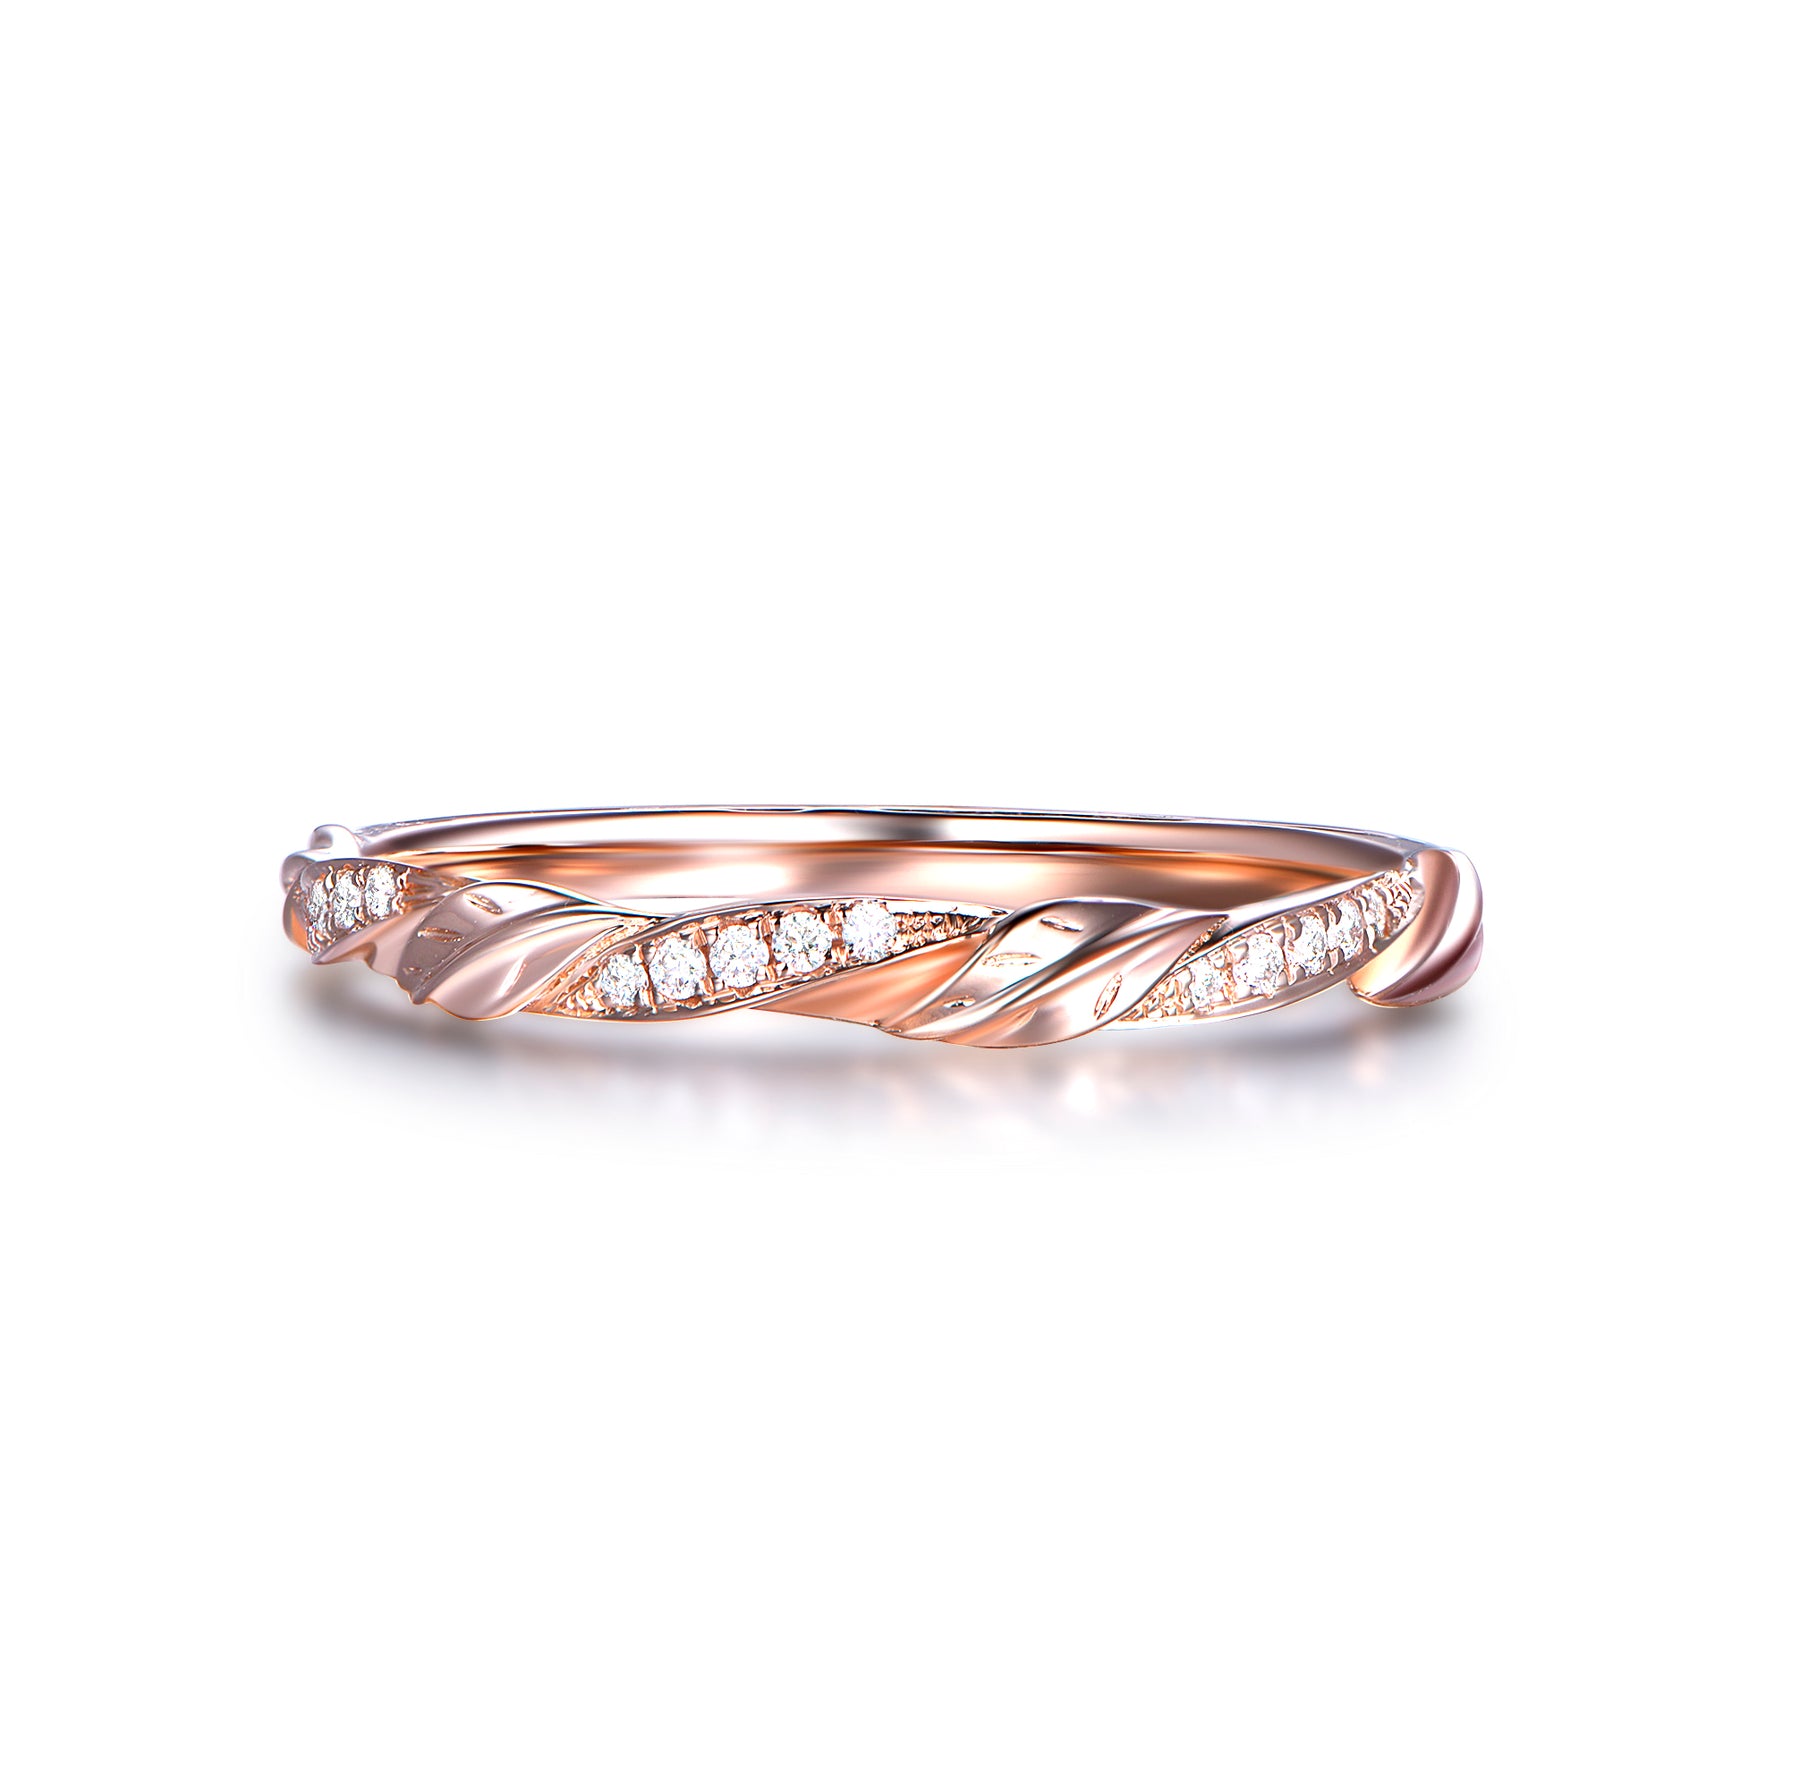 Reserved for Luke: Matching Band for 7mm Round Morganite Engagement Ring Pave VS Diamond Wedding 18K Rose Gold